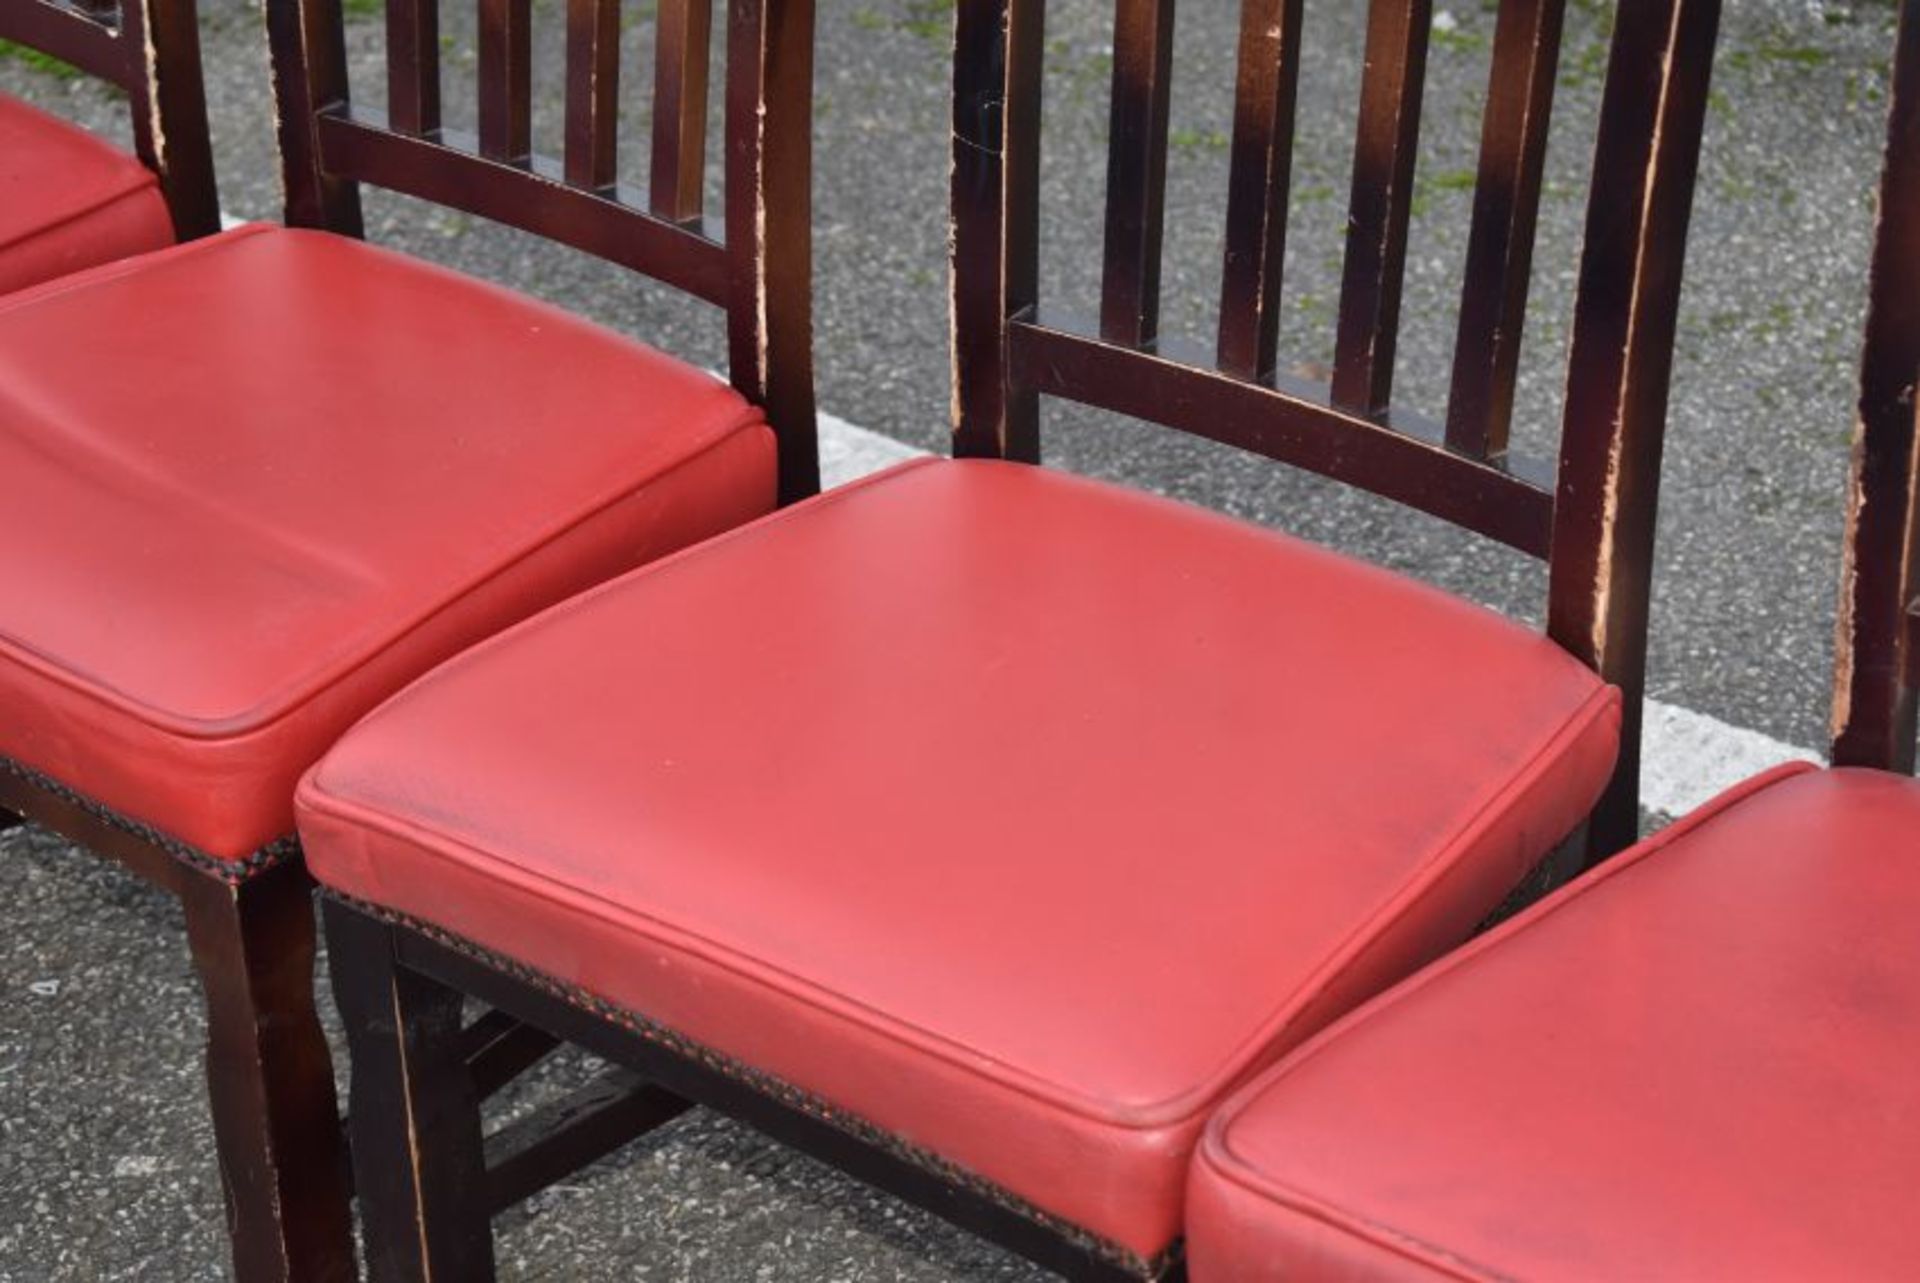 8 x Restaurant Dining Chairs With Dark Stained Wood Finish and Red Leather Seat Pads - Recently Remo - Image 4 of 6